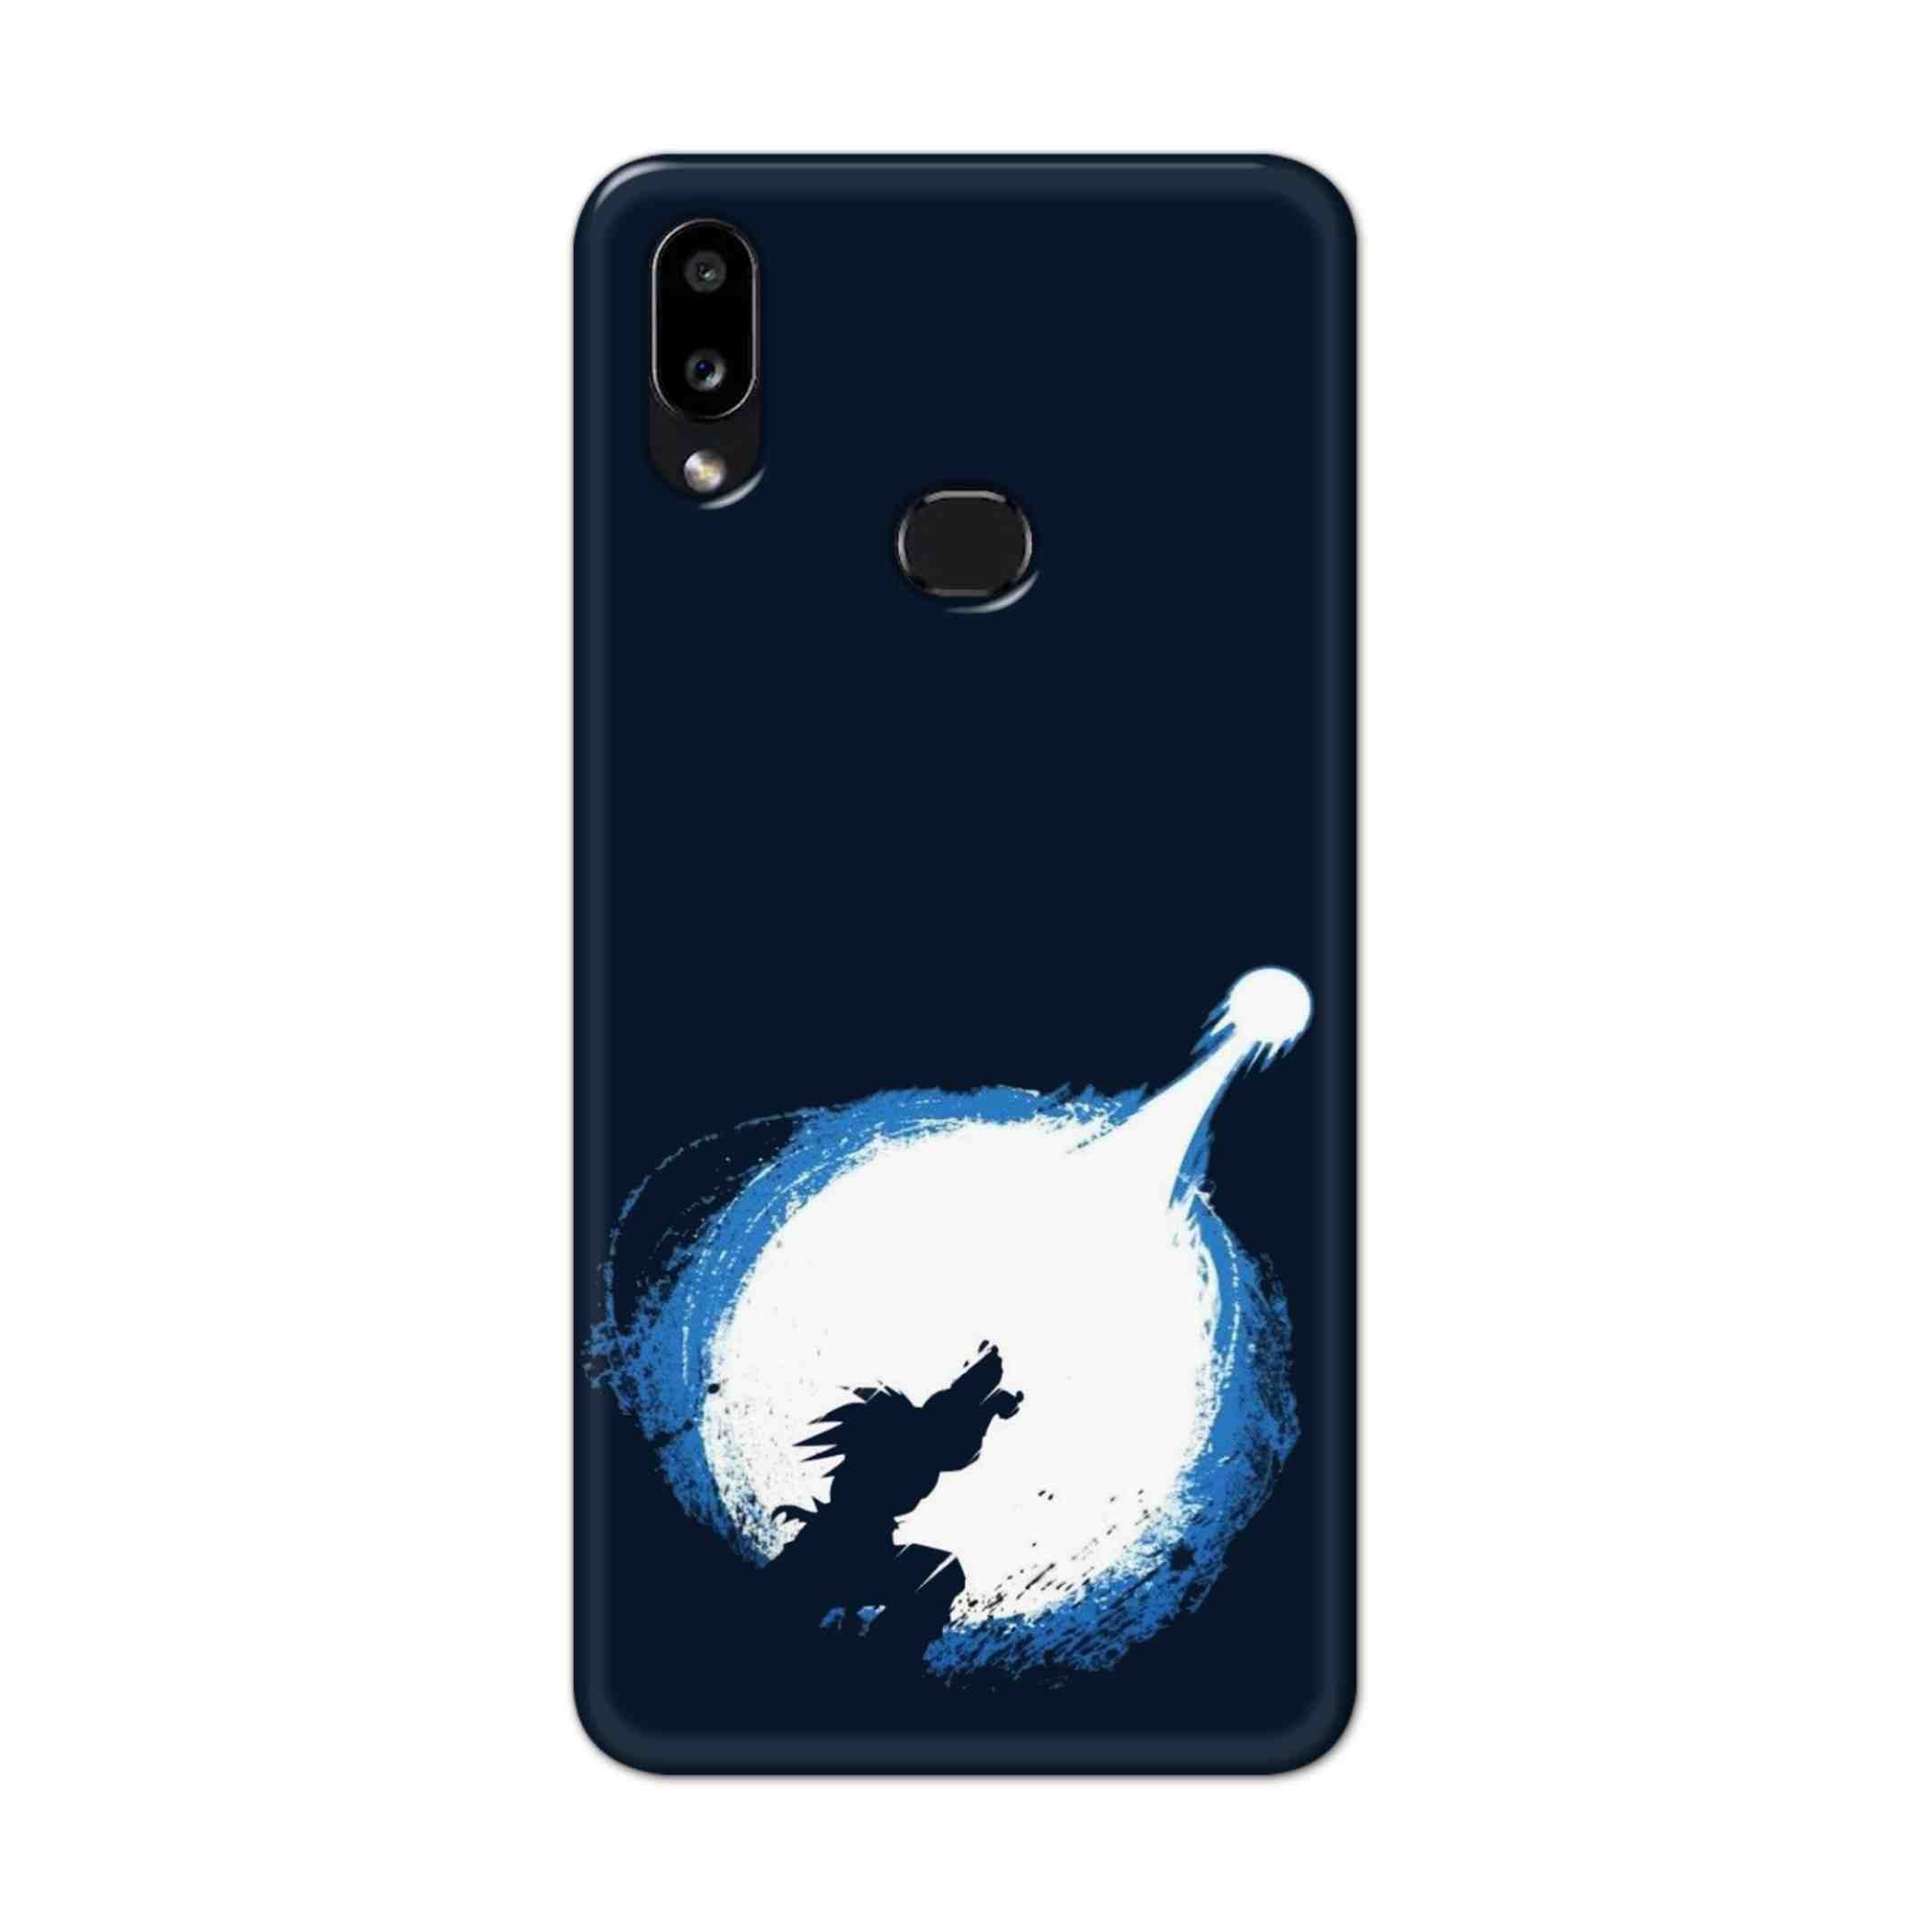 Buy Goku Power Hard Back Mobile Phone Case Cover For Samsung Galaxy M01s Online